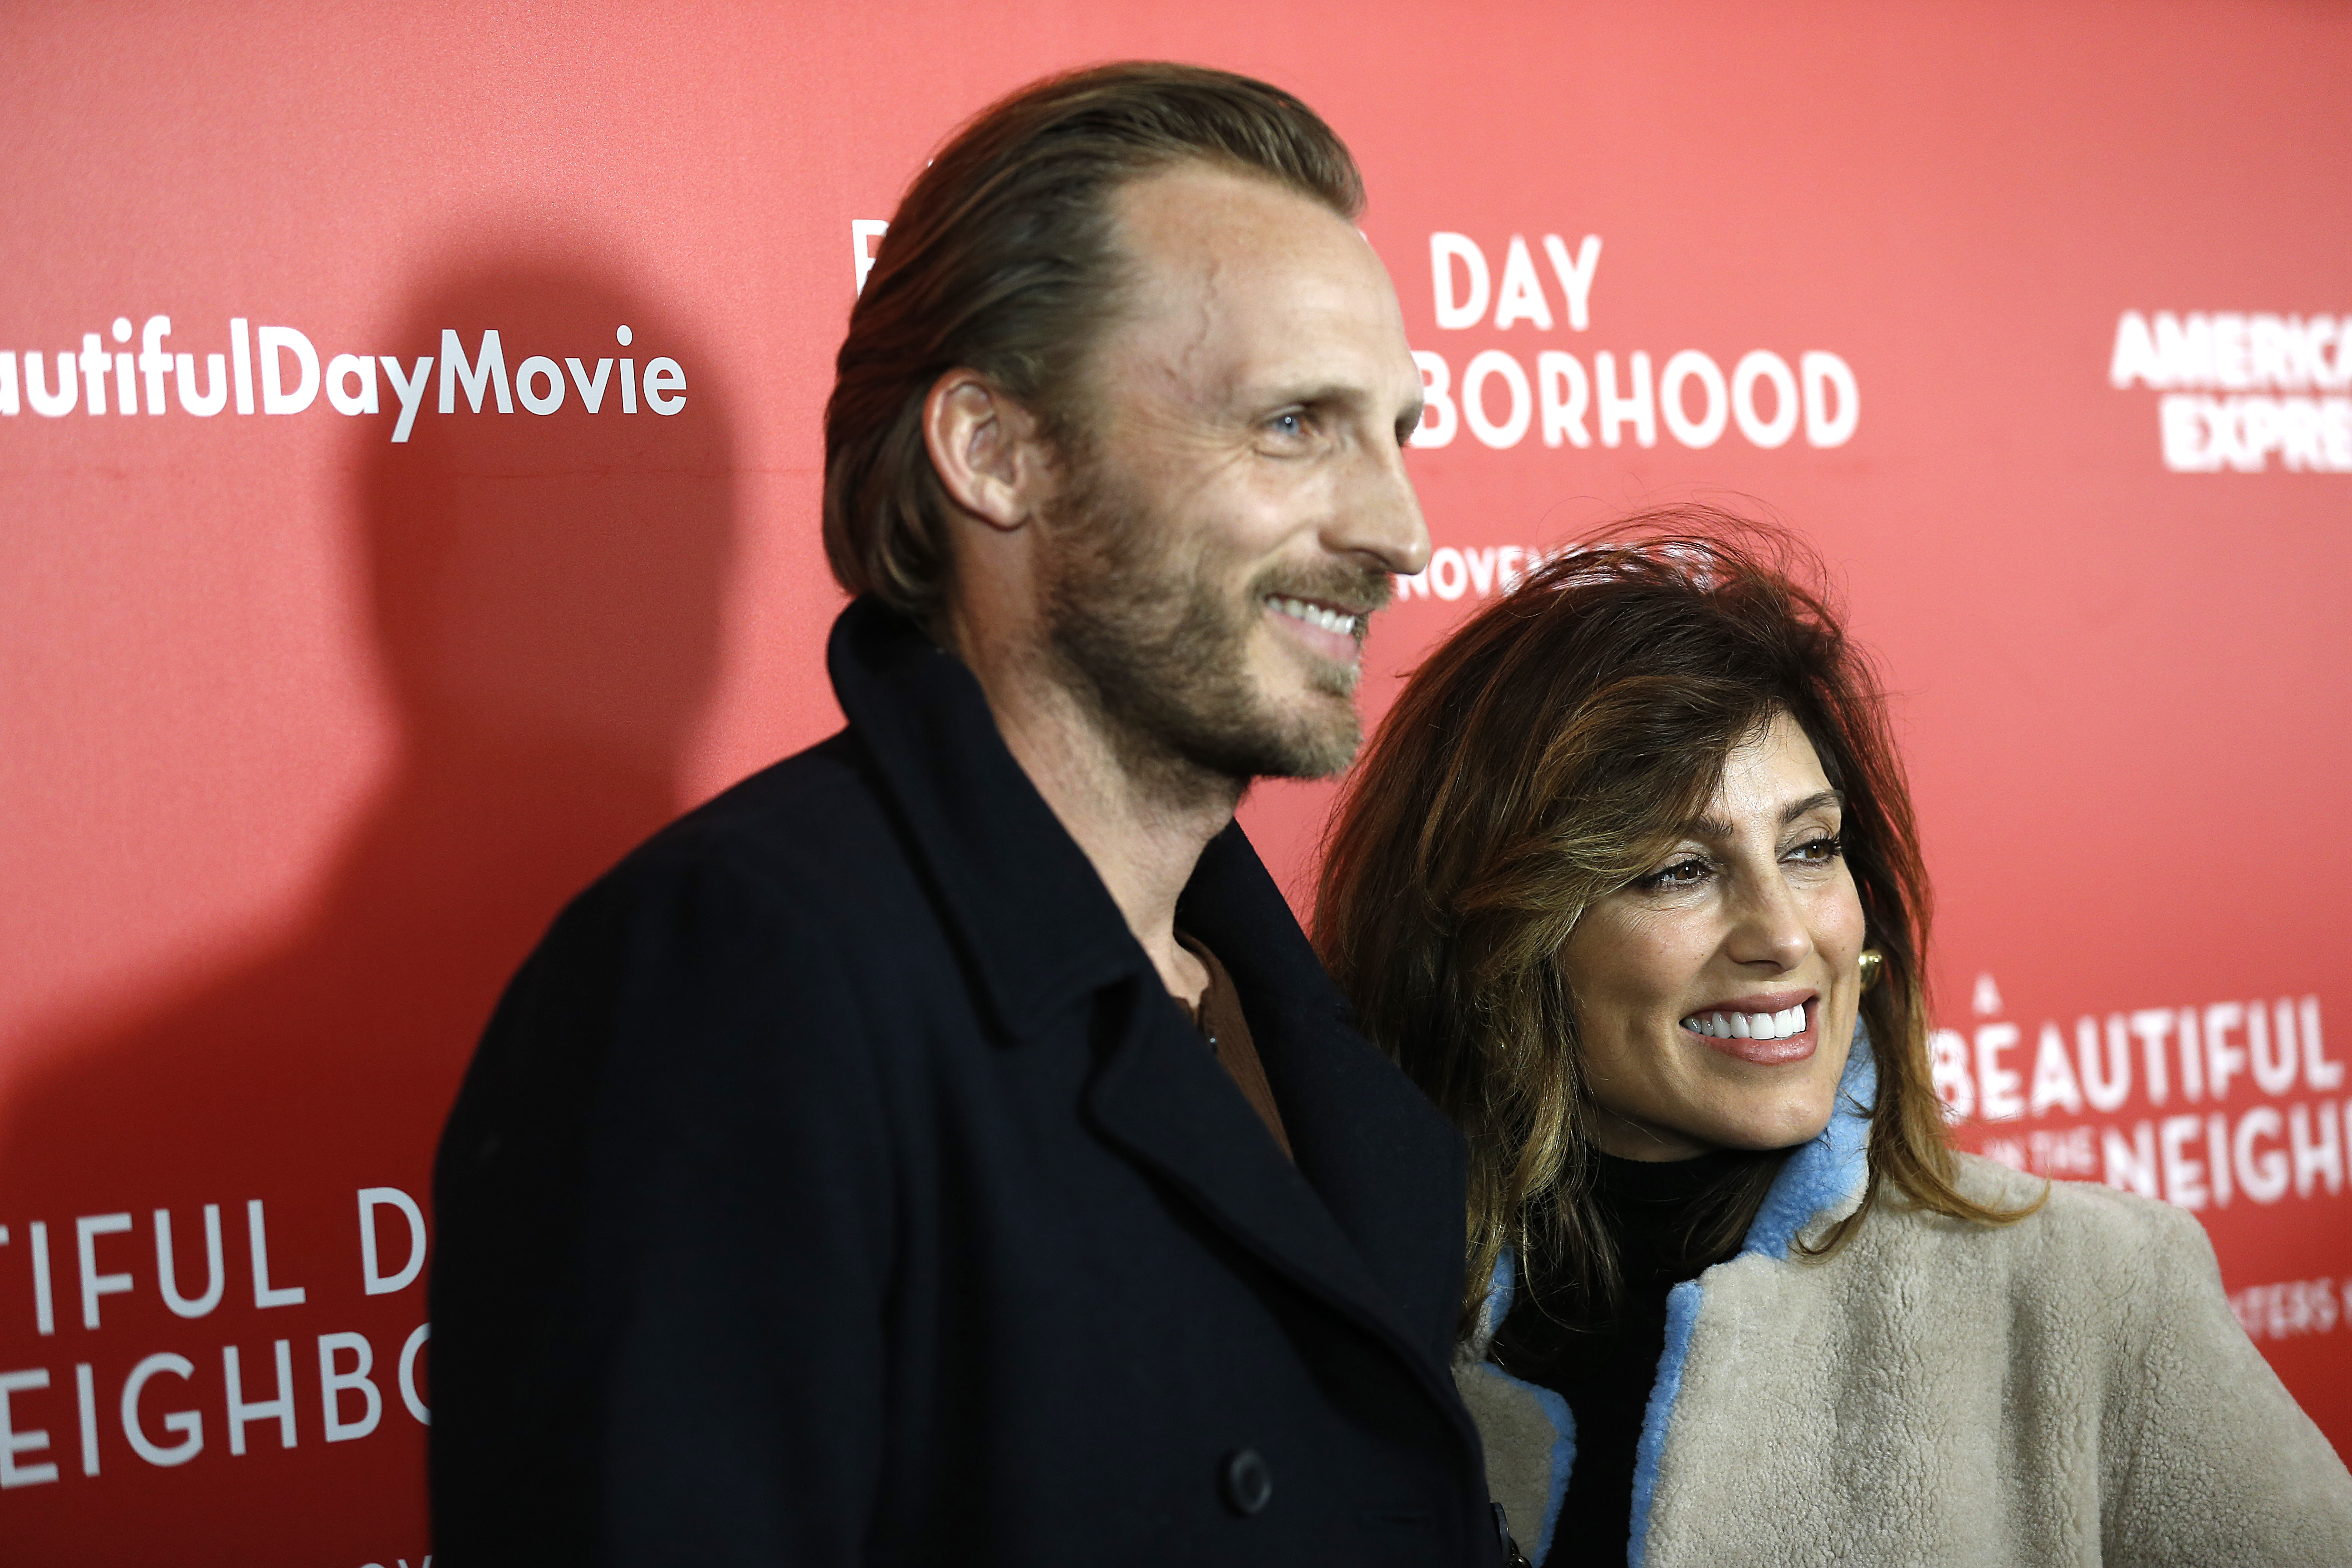 Jesper Vesterstrøm and Jennifer Esposito attend "A Beautiful Day In The Neighborhood" New York screening at Henry R. Luce Auditorium, at Brookfield Place, on November 17, 2019, in New York City. | Source: Getty Images